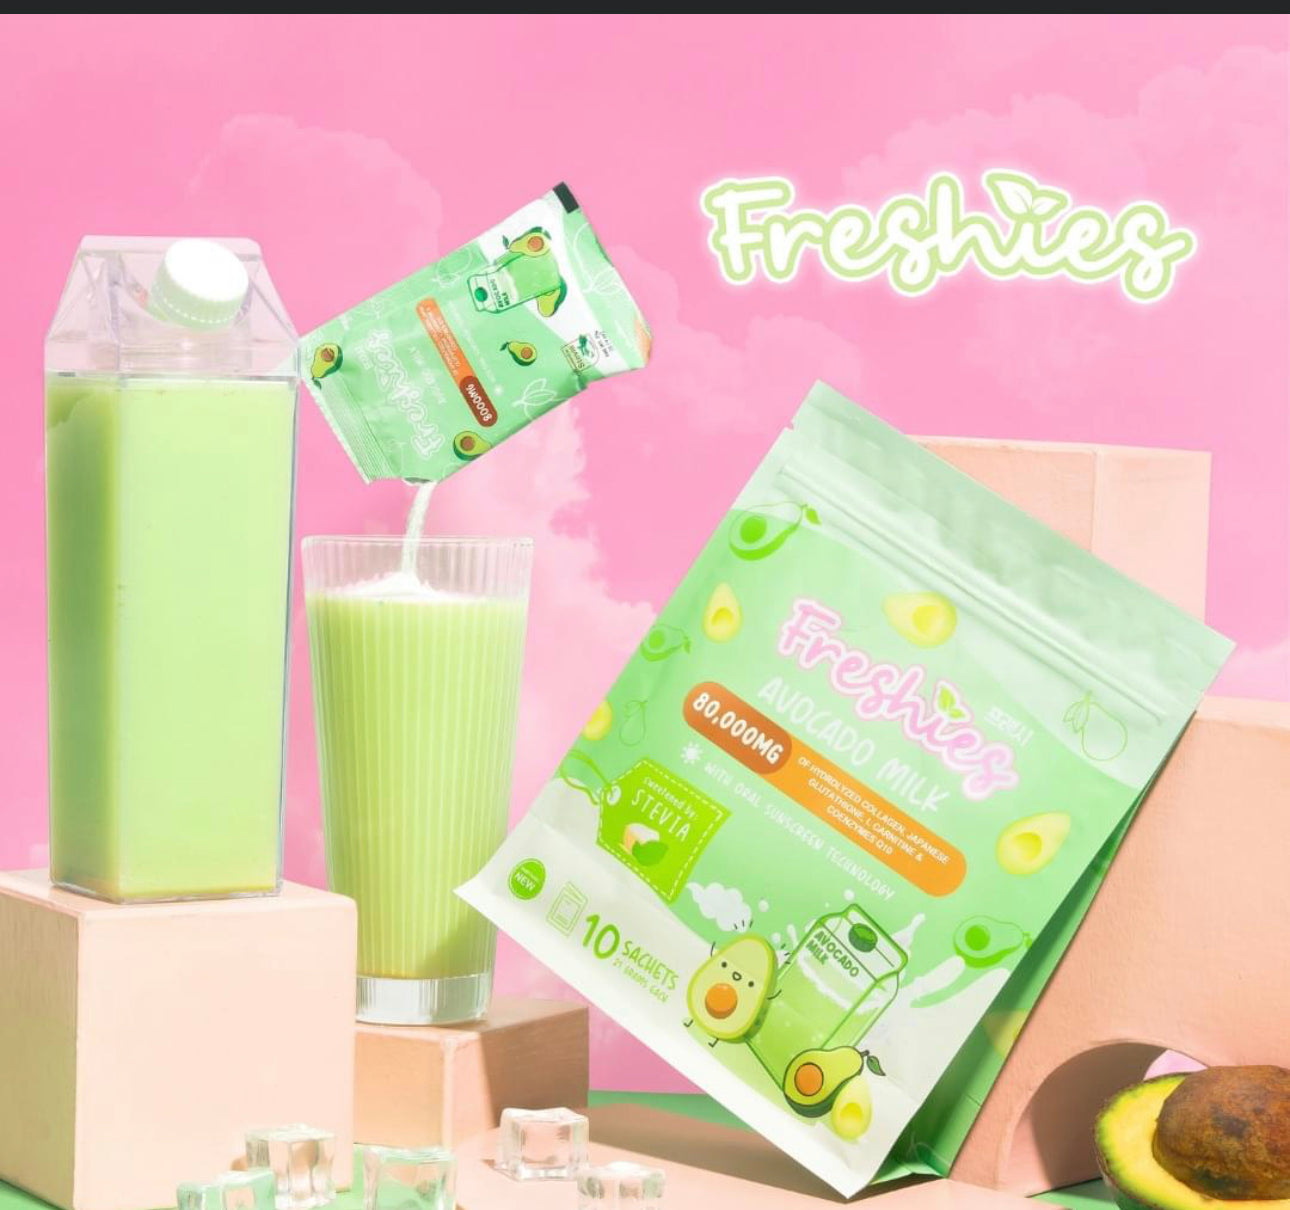 Freshies Avocado Milk with Gluta and Collagen